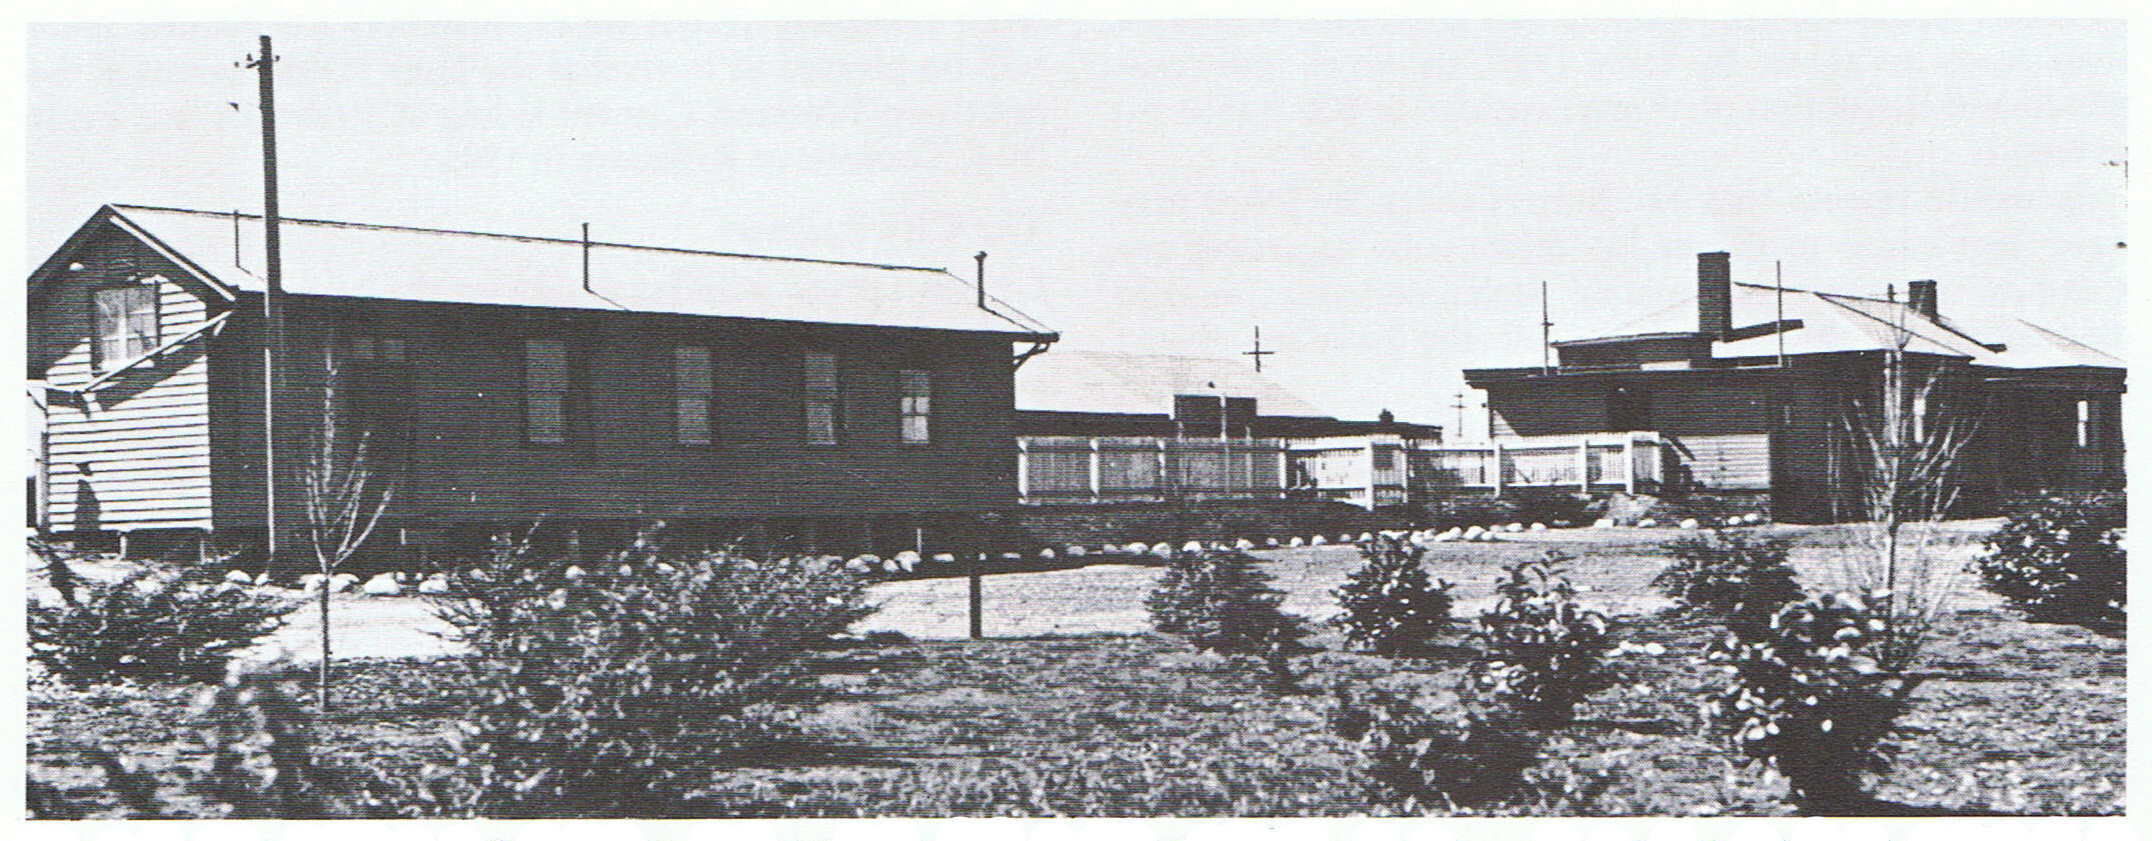 The 1914 station building